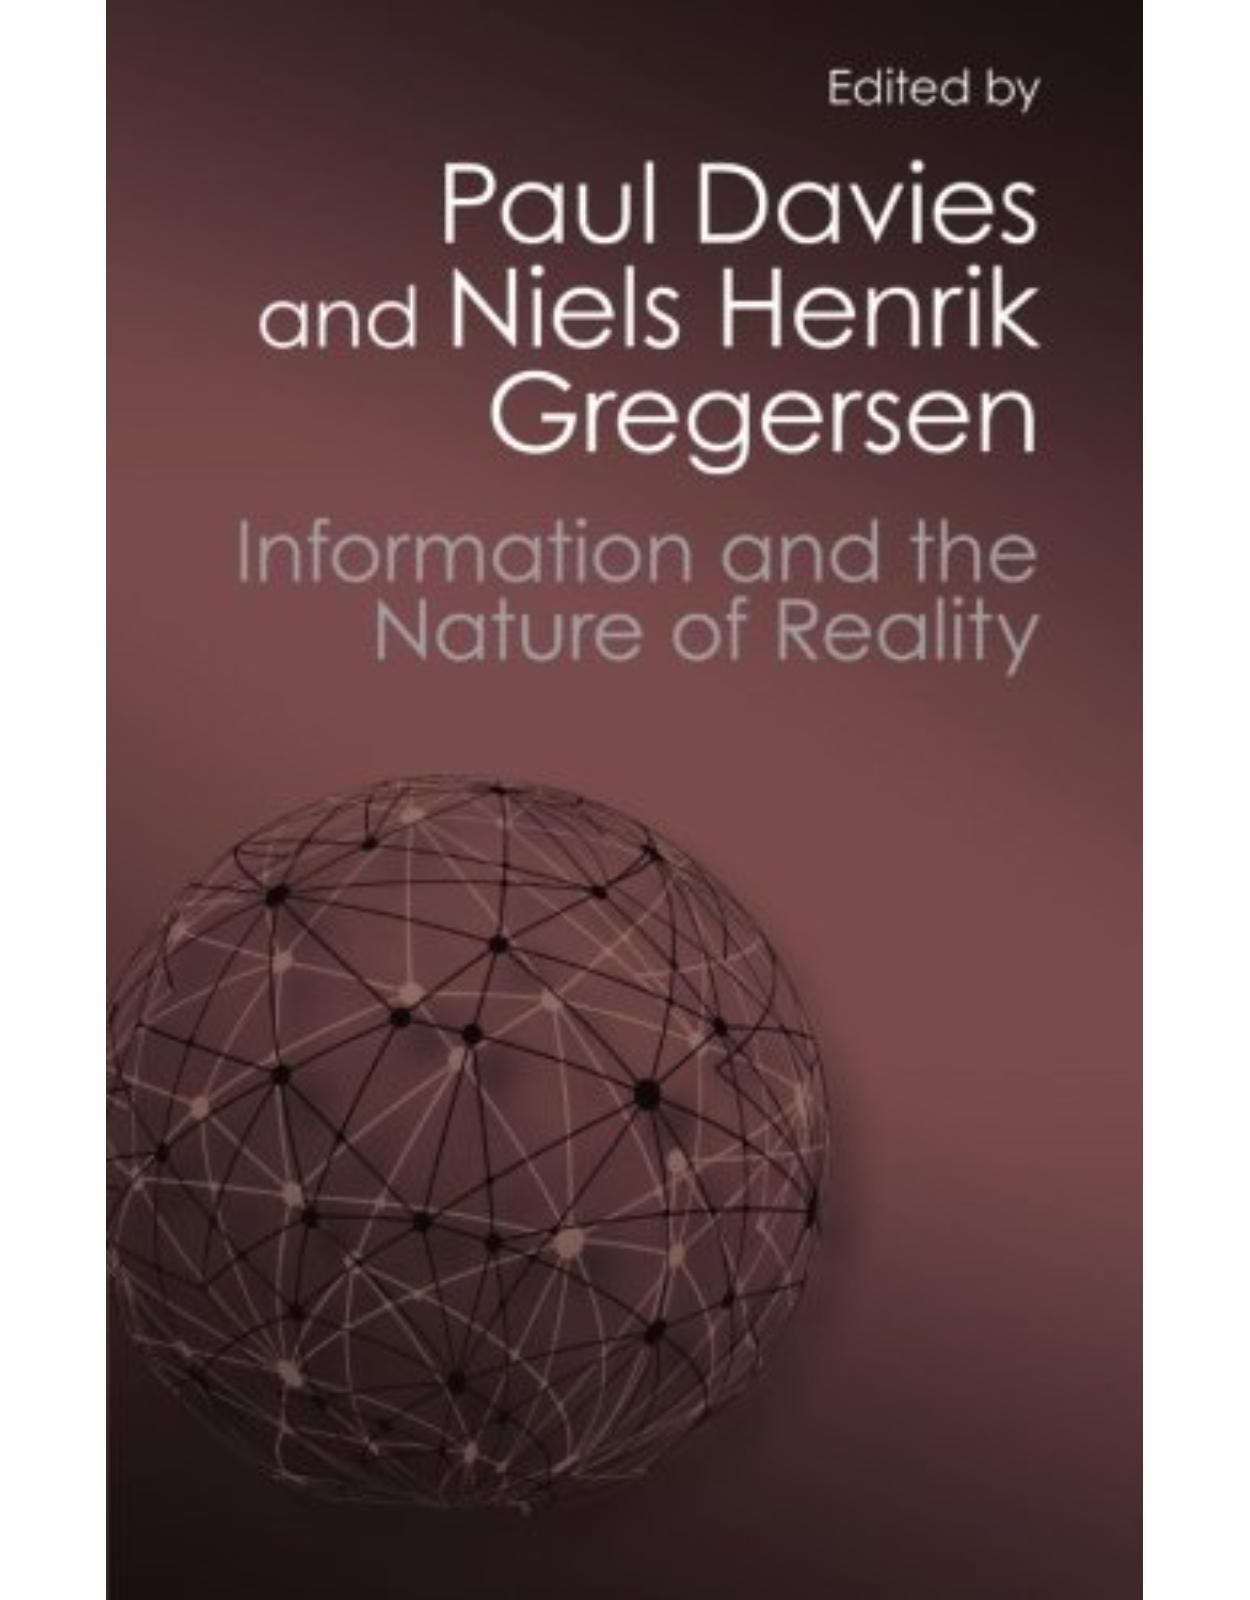 Information and the Nature of Reality: From Physics to Metaphysics (Canto Classics)